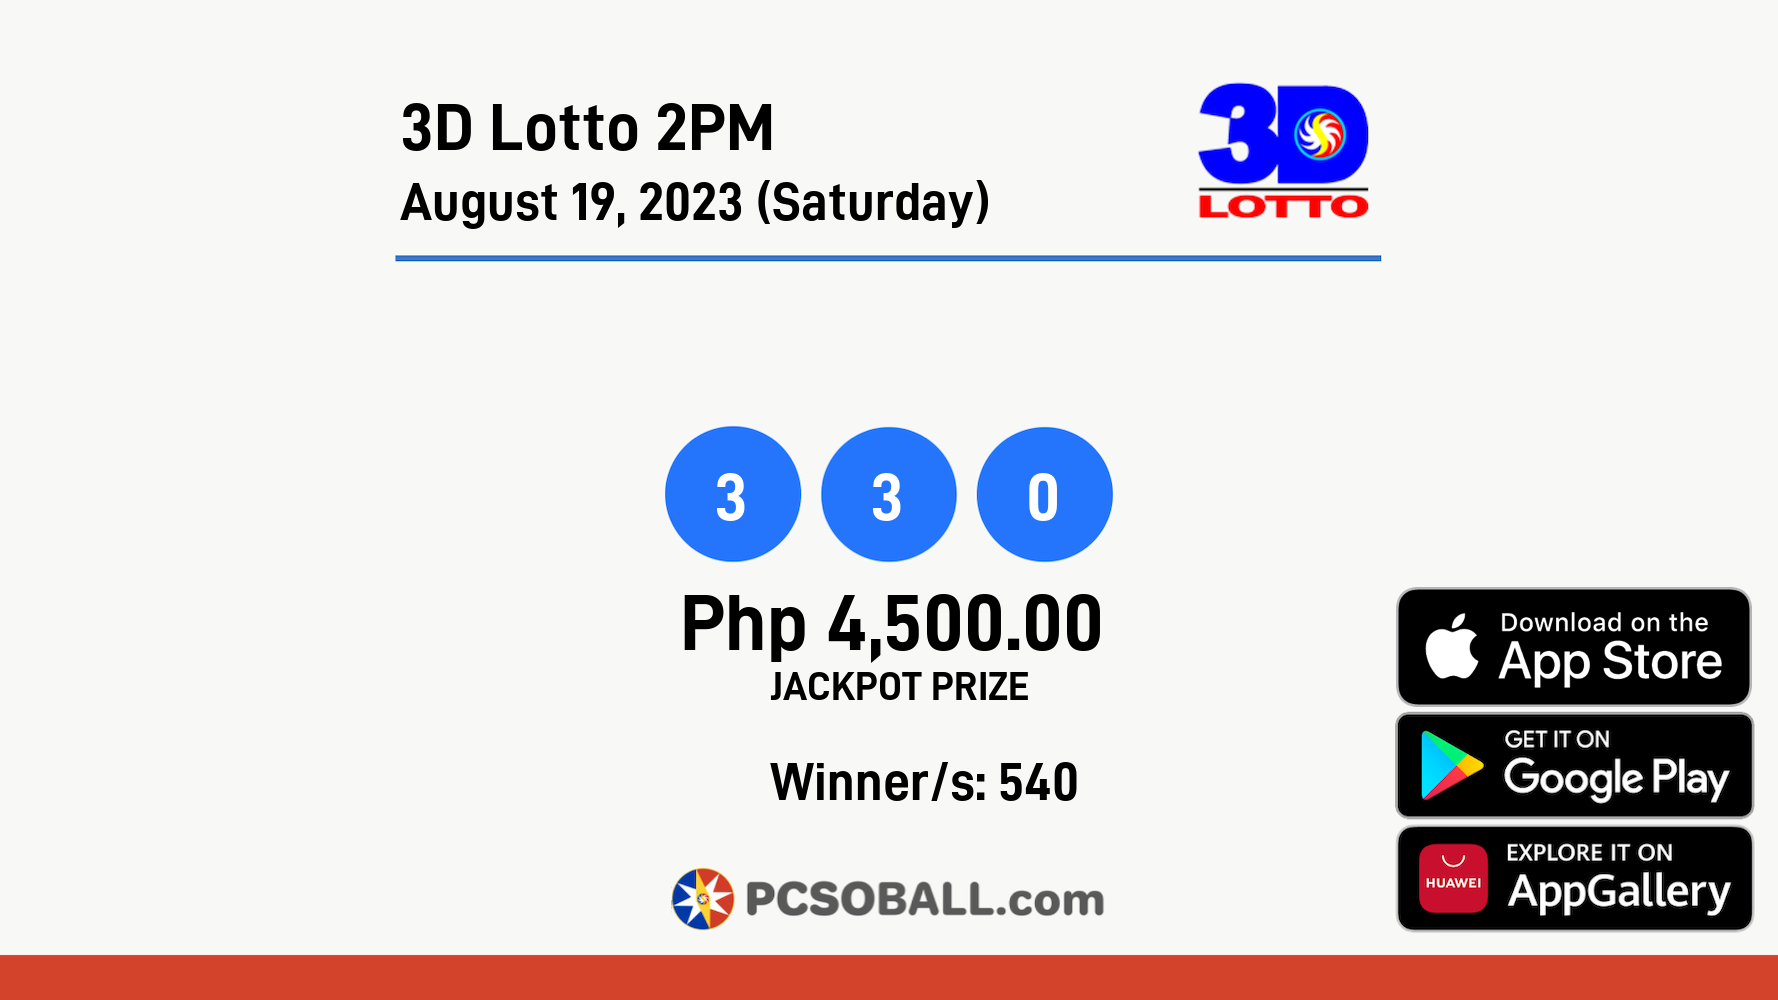 3D Lotto 2PM August 19, 2023 (Saturday) Result